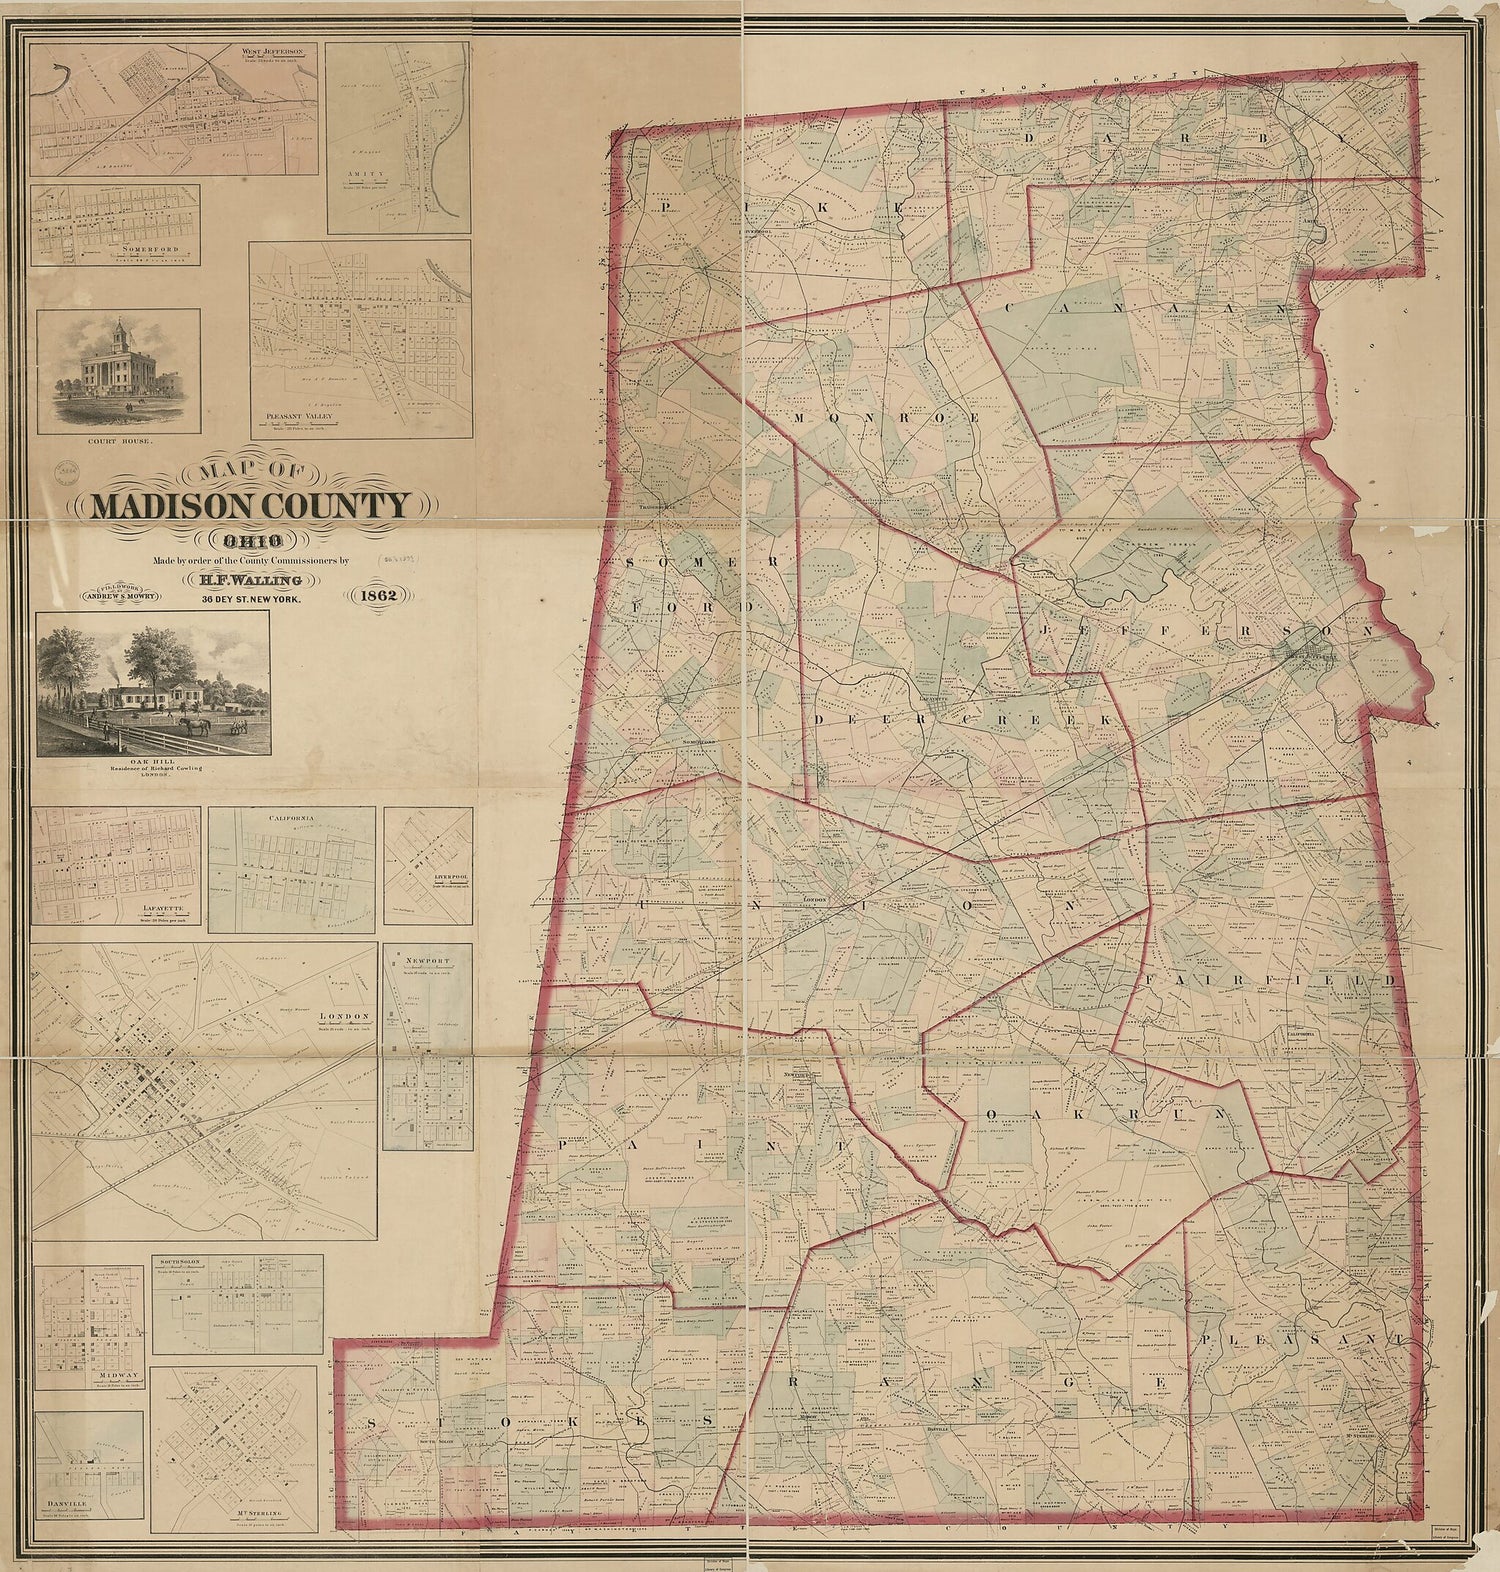 This old map of Map of Madison County, Ohio from 1862 was created by Andrew S. Mowry, Henry Francis Walling in 1862